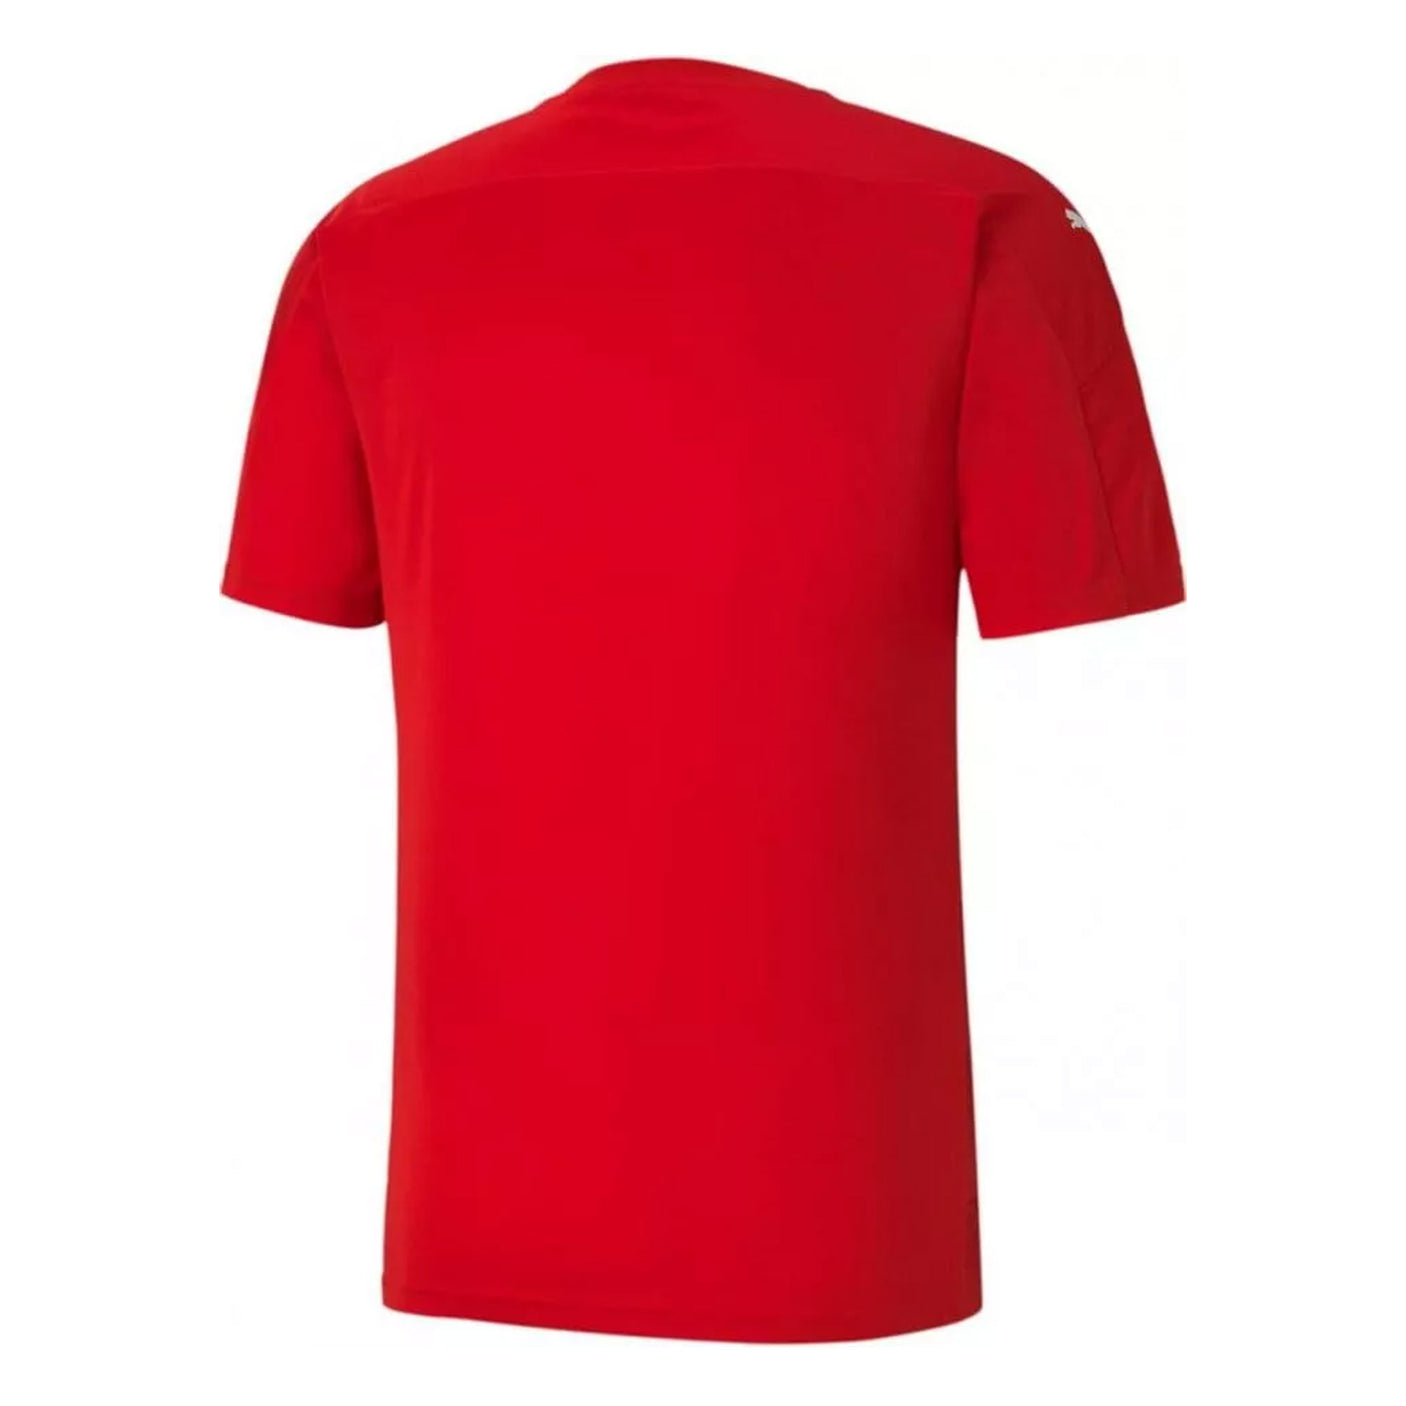 Puma Men's Team Final 21 Graphic Jersey Red/White Back